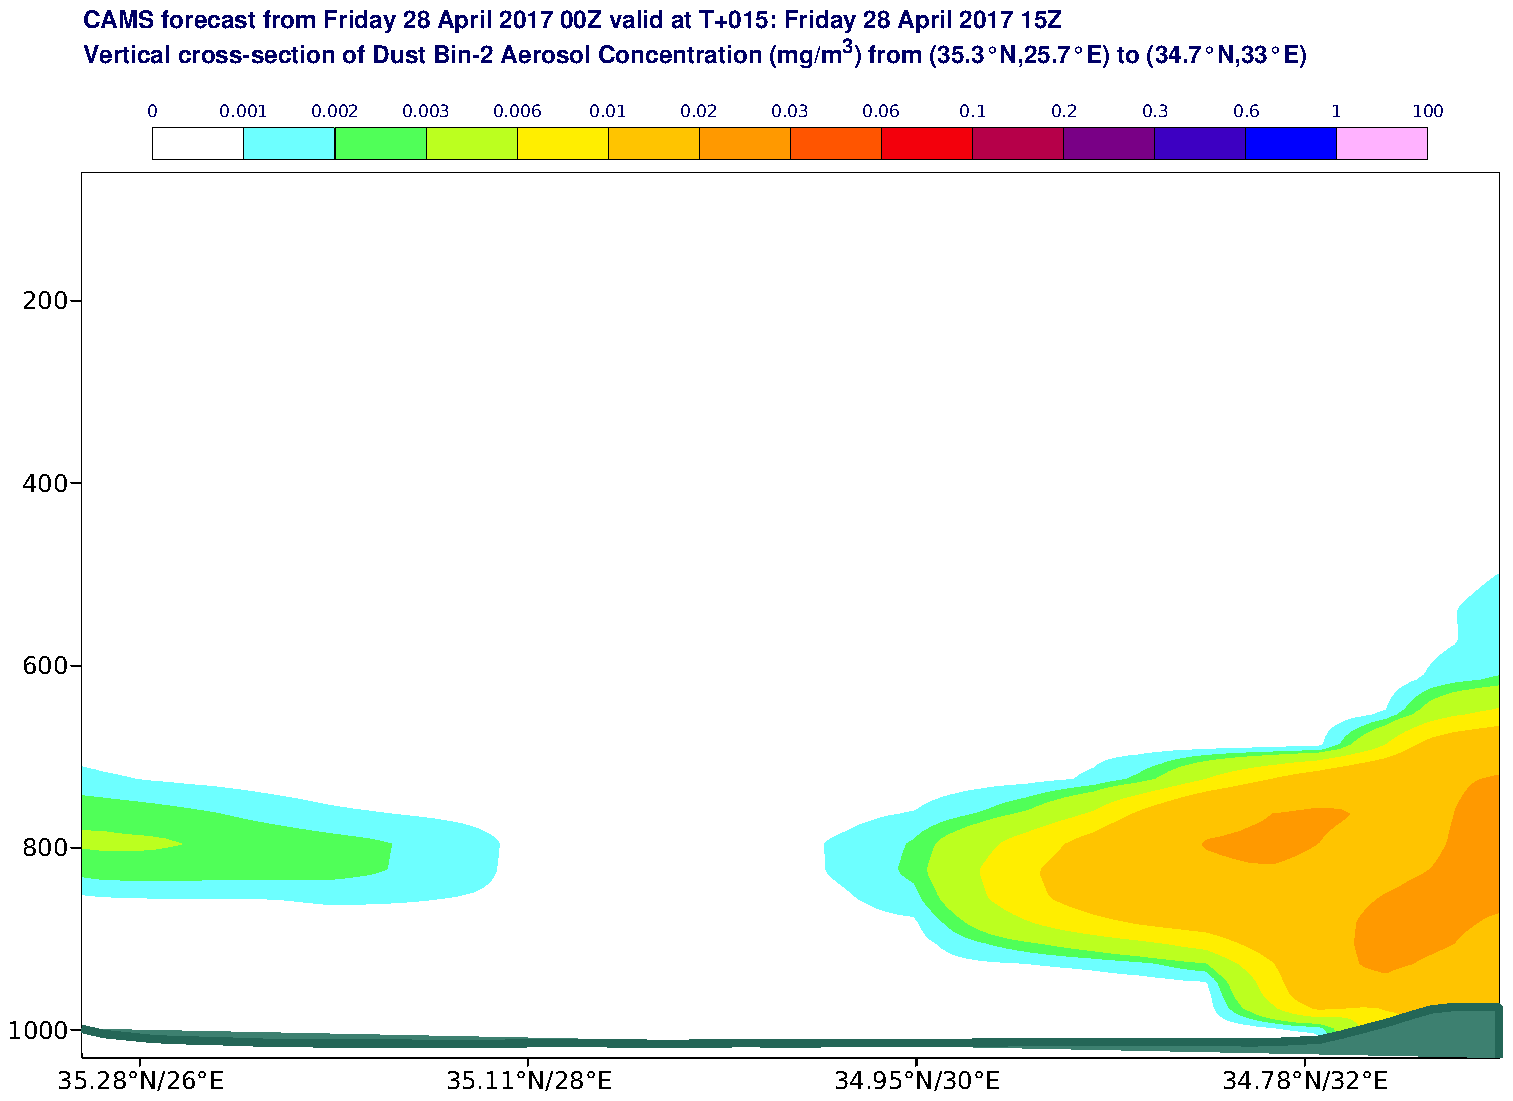 Vertical cross-section of Dust Bin-2 Aerosol Concentration (mg/m3) valid at T15 - 2017-04-28 15:00